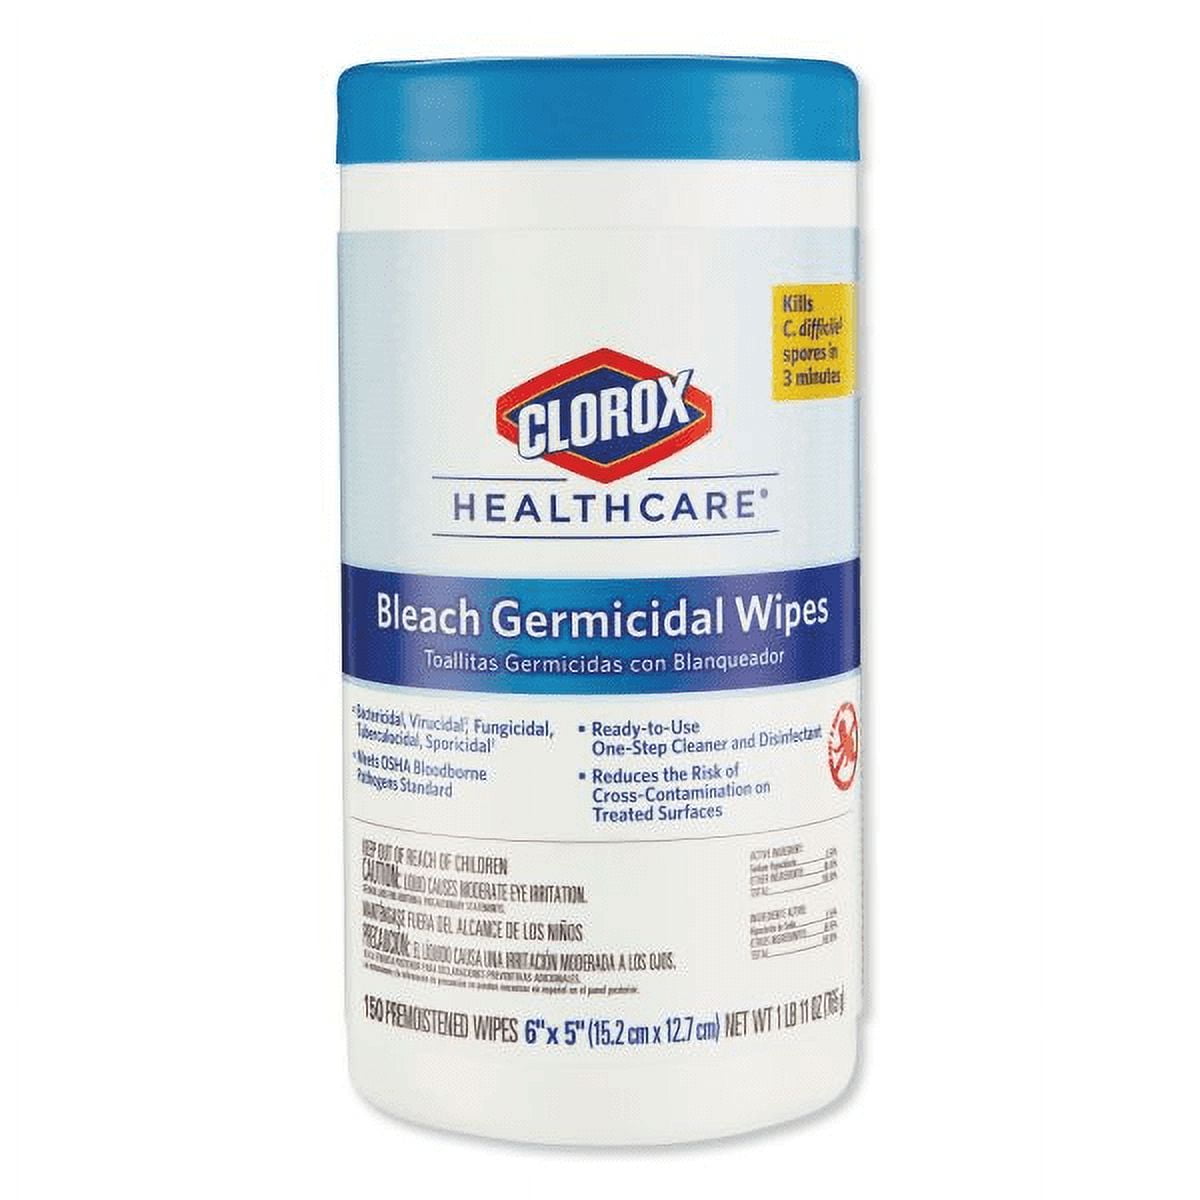 NEW Clorox Products = as low as $0.09 Dust Wipes at Kroger